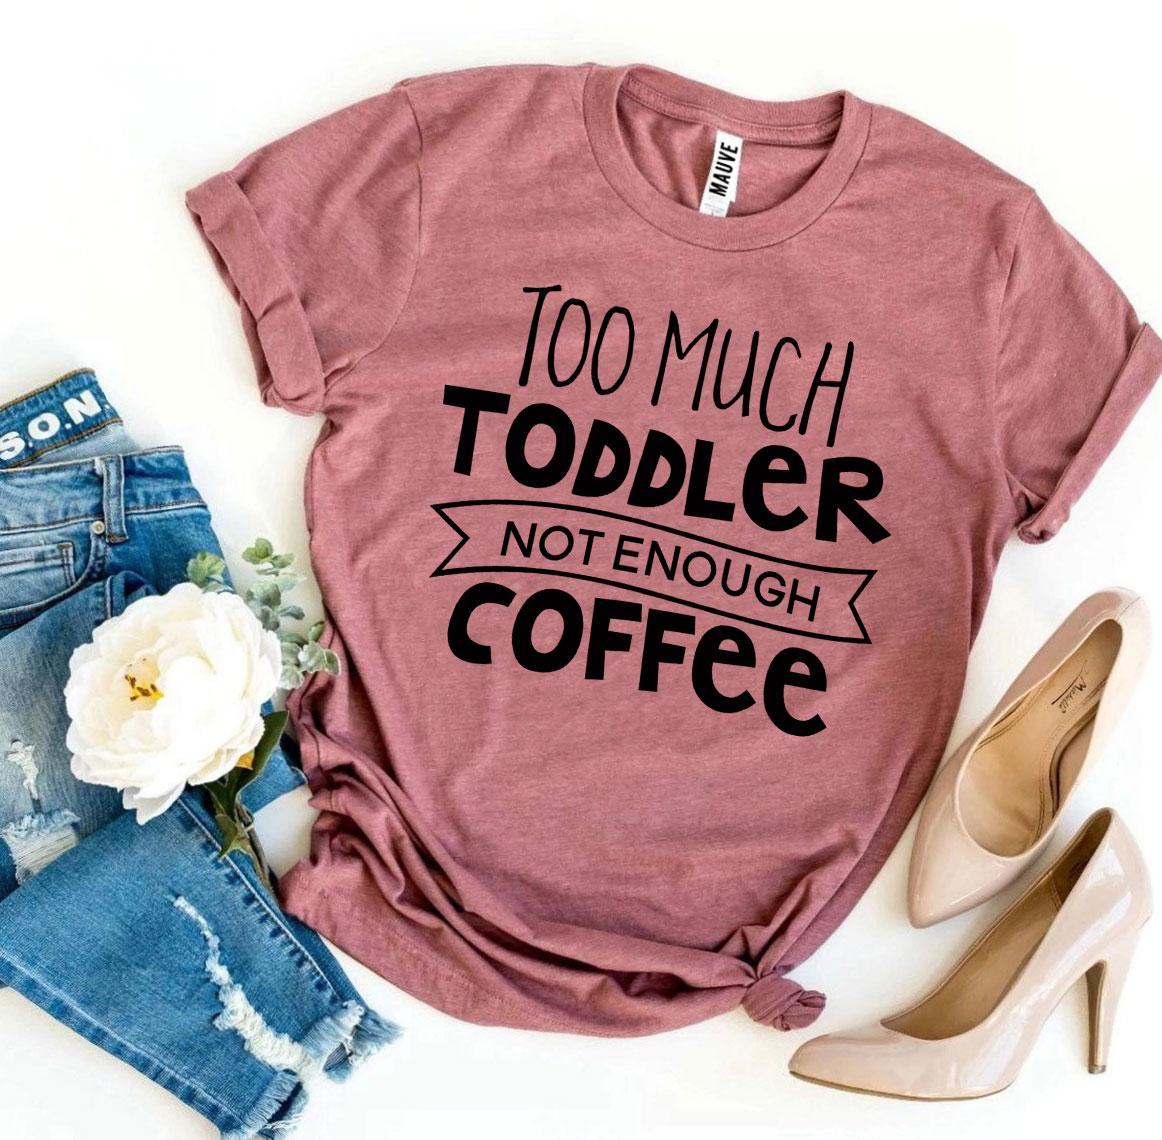 Embrace Parenthood in Style: Too Much Toddler, Not Enough Coffee T-shirt